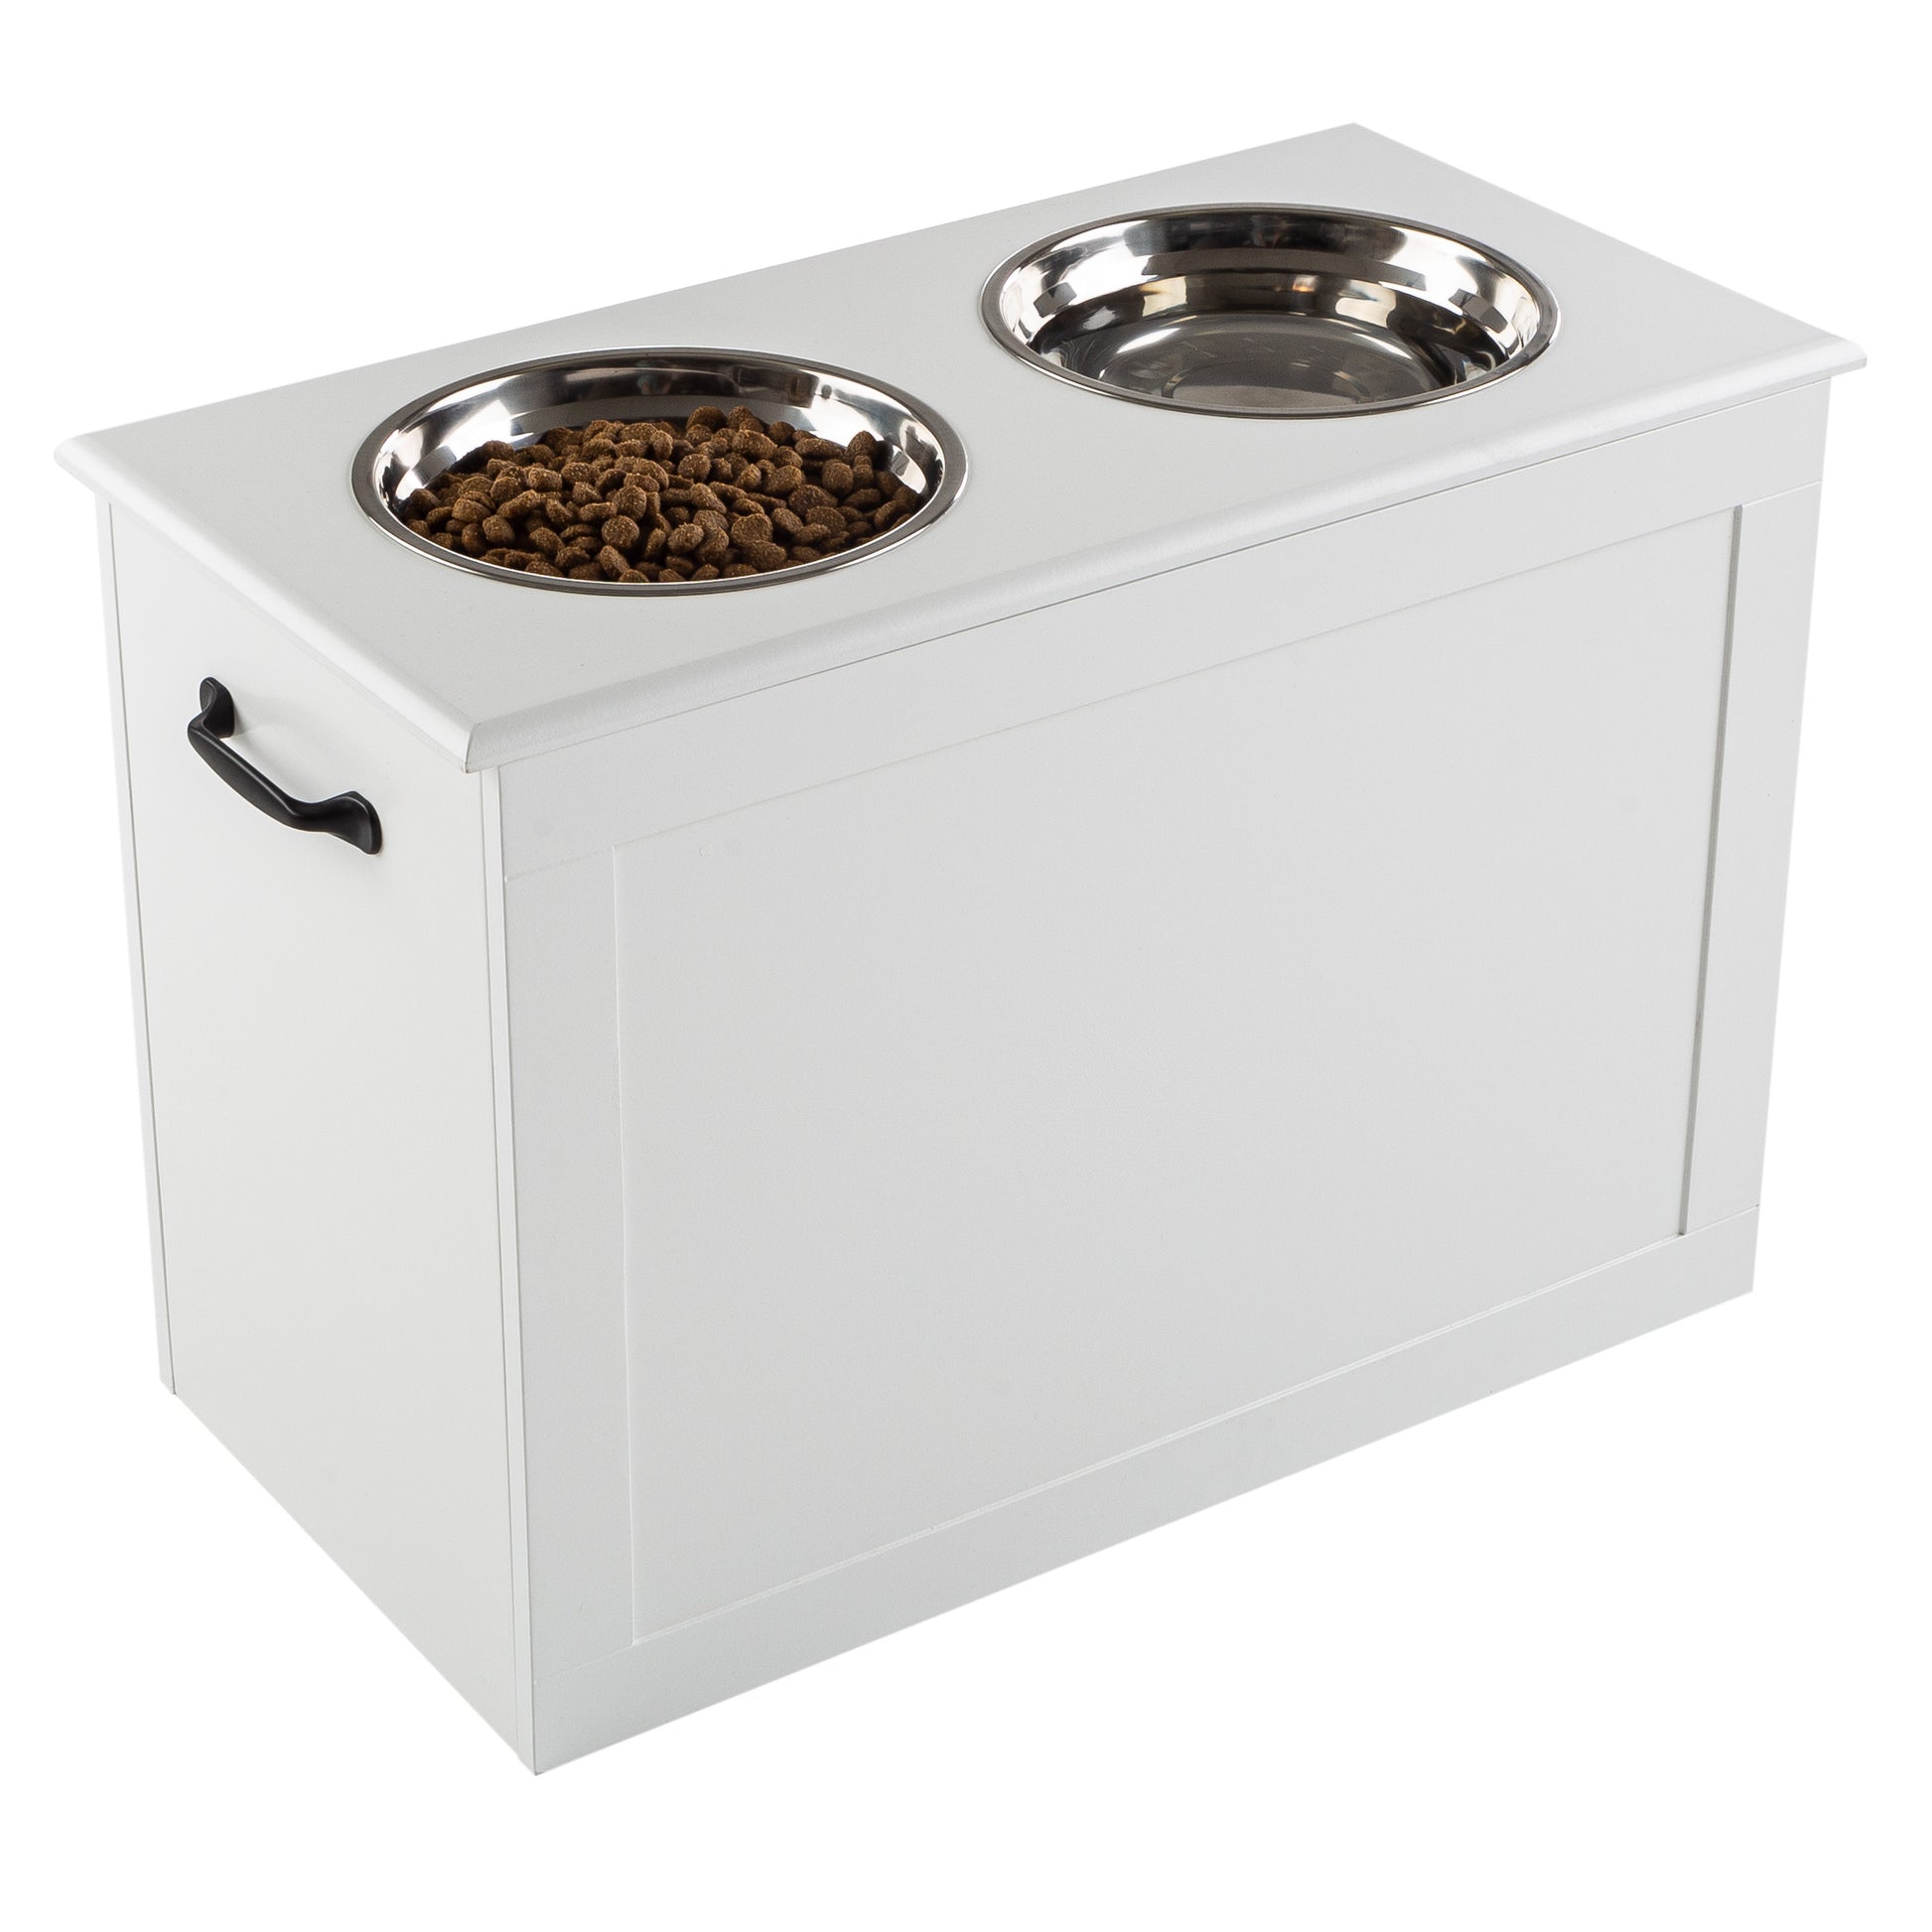 XKX Elevated Dog Bowls for Small Dogs and Cats, Stainless Steel